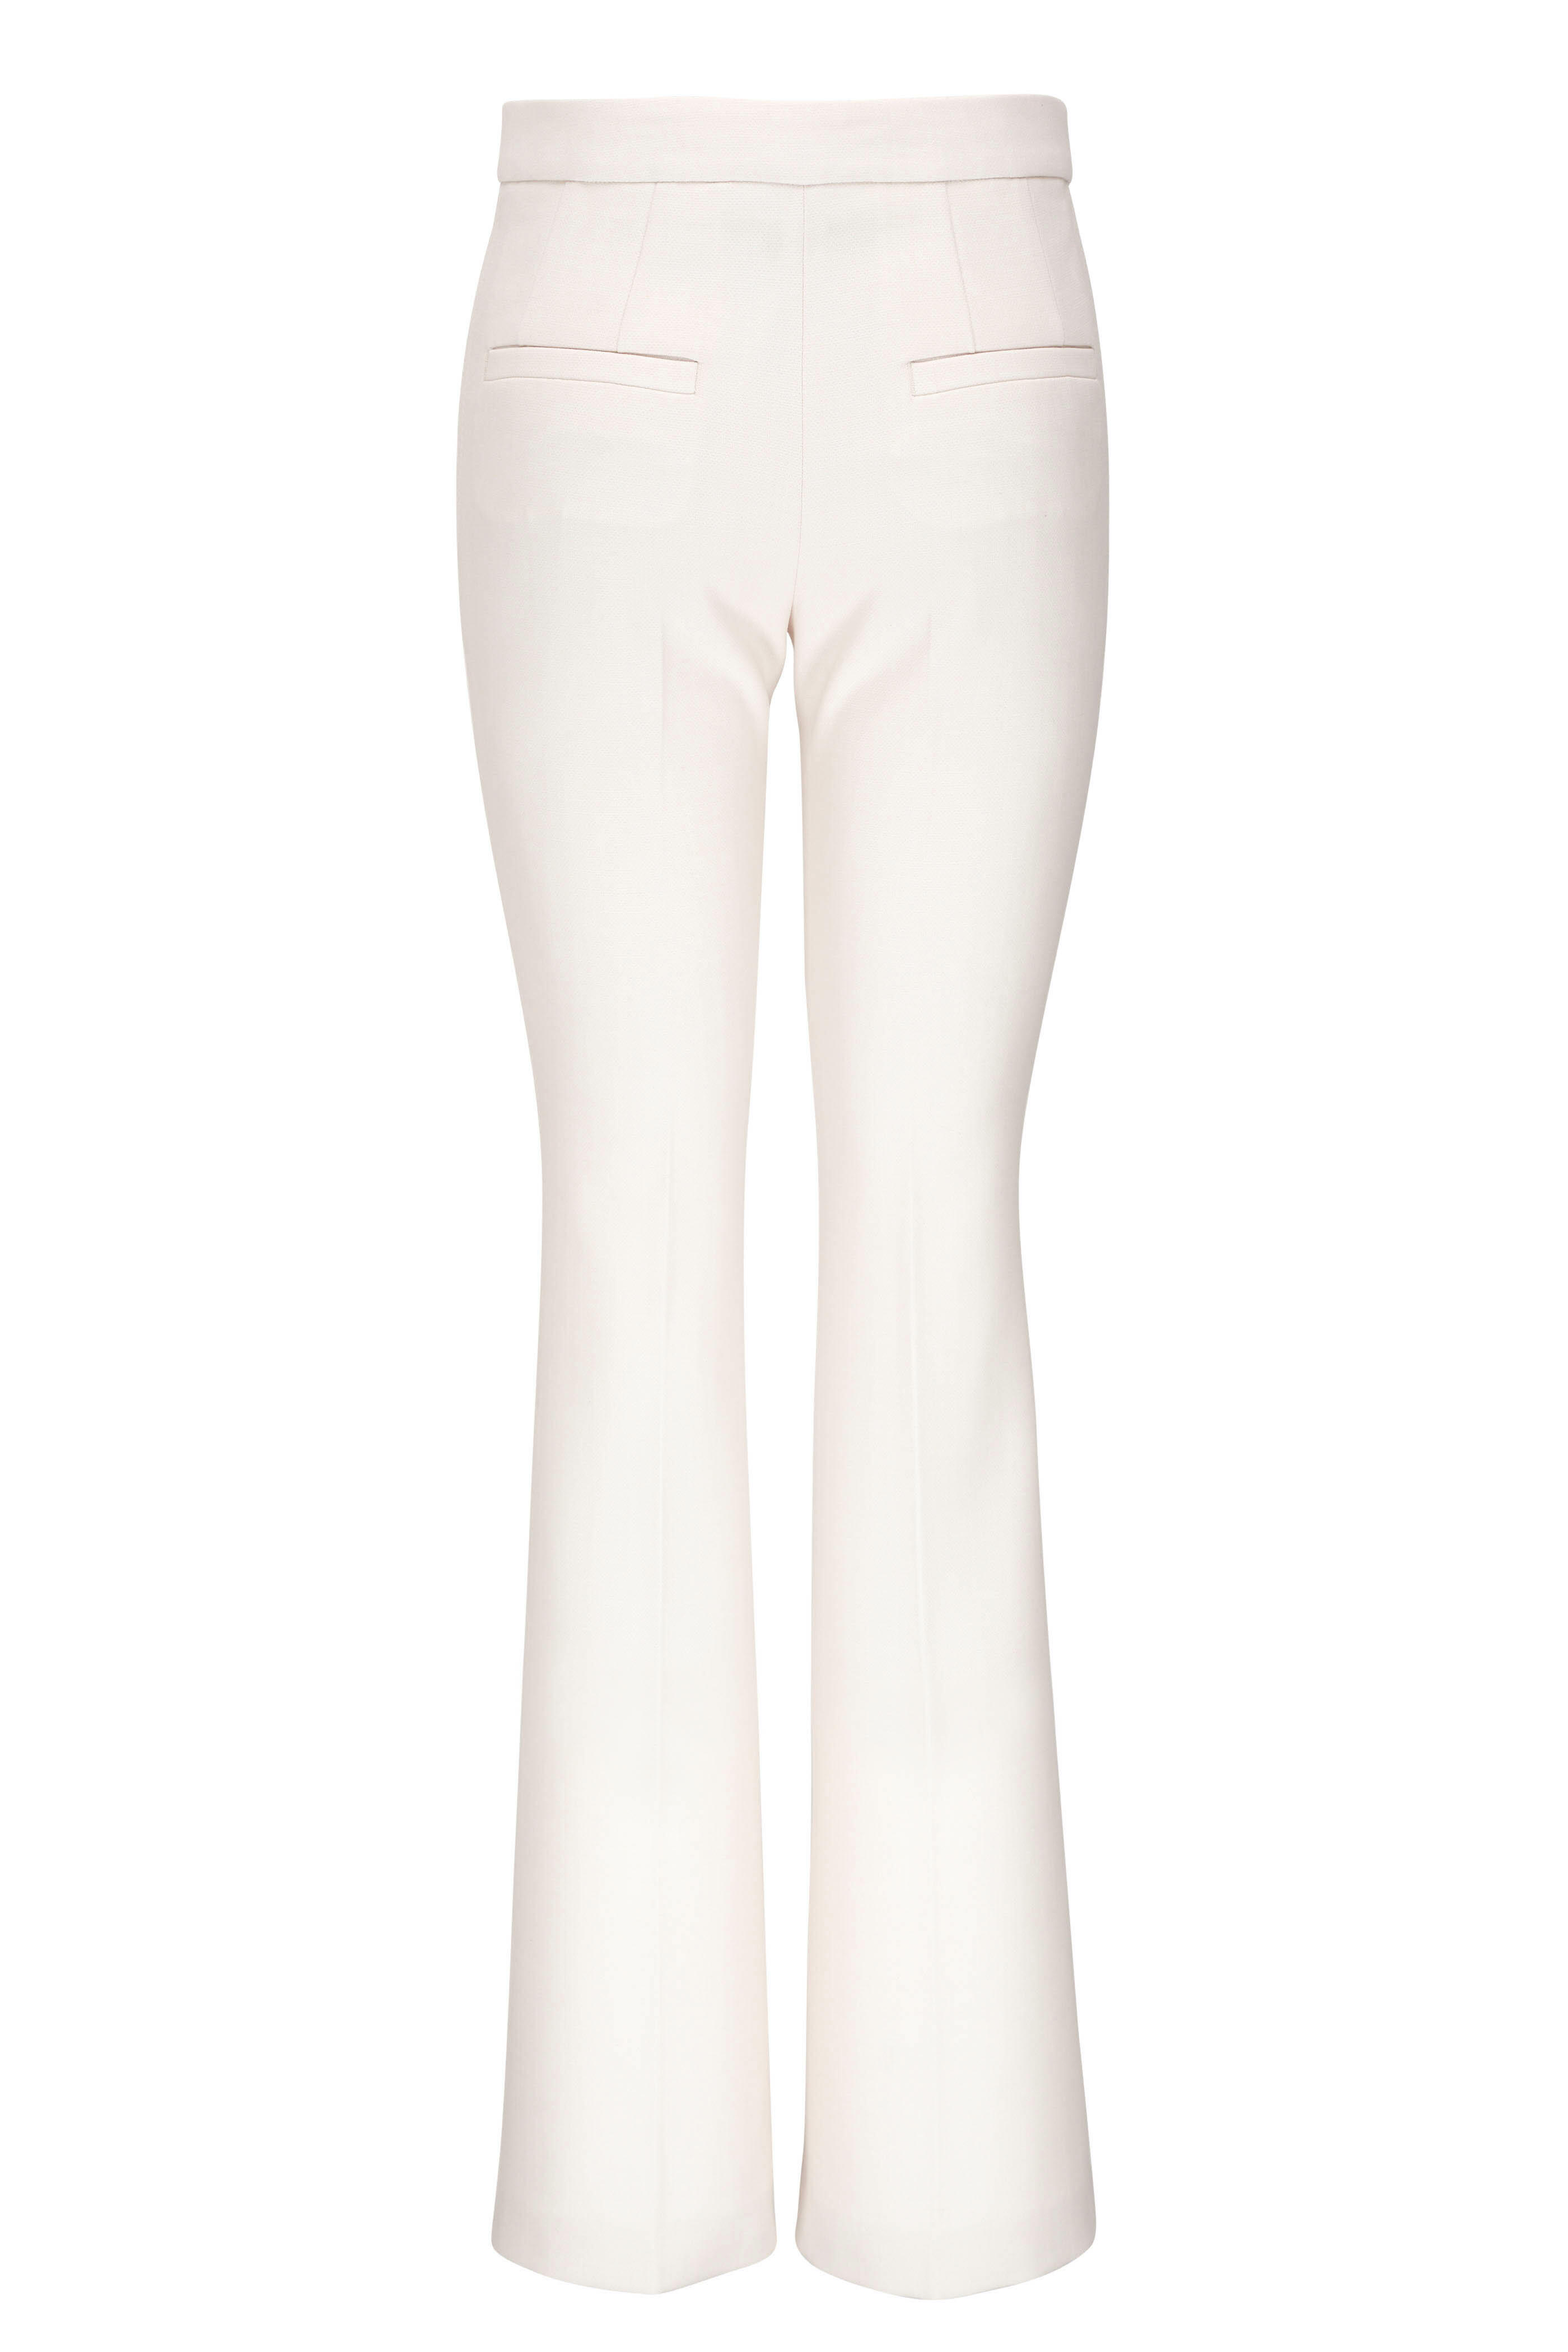 Dorothee Schumacher - Striking Coolness Ivory Bootcut Pant